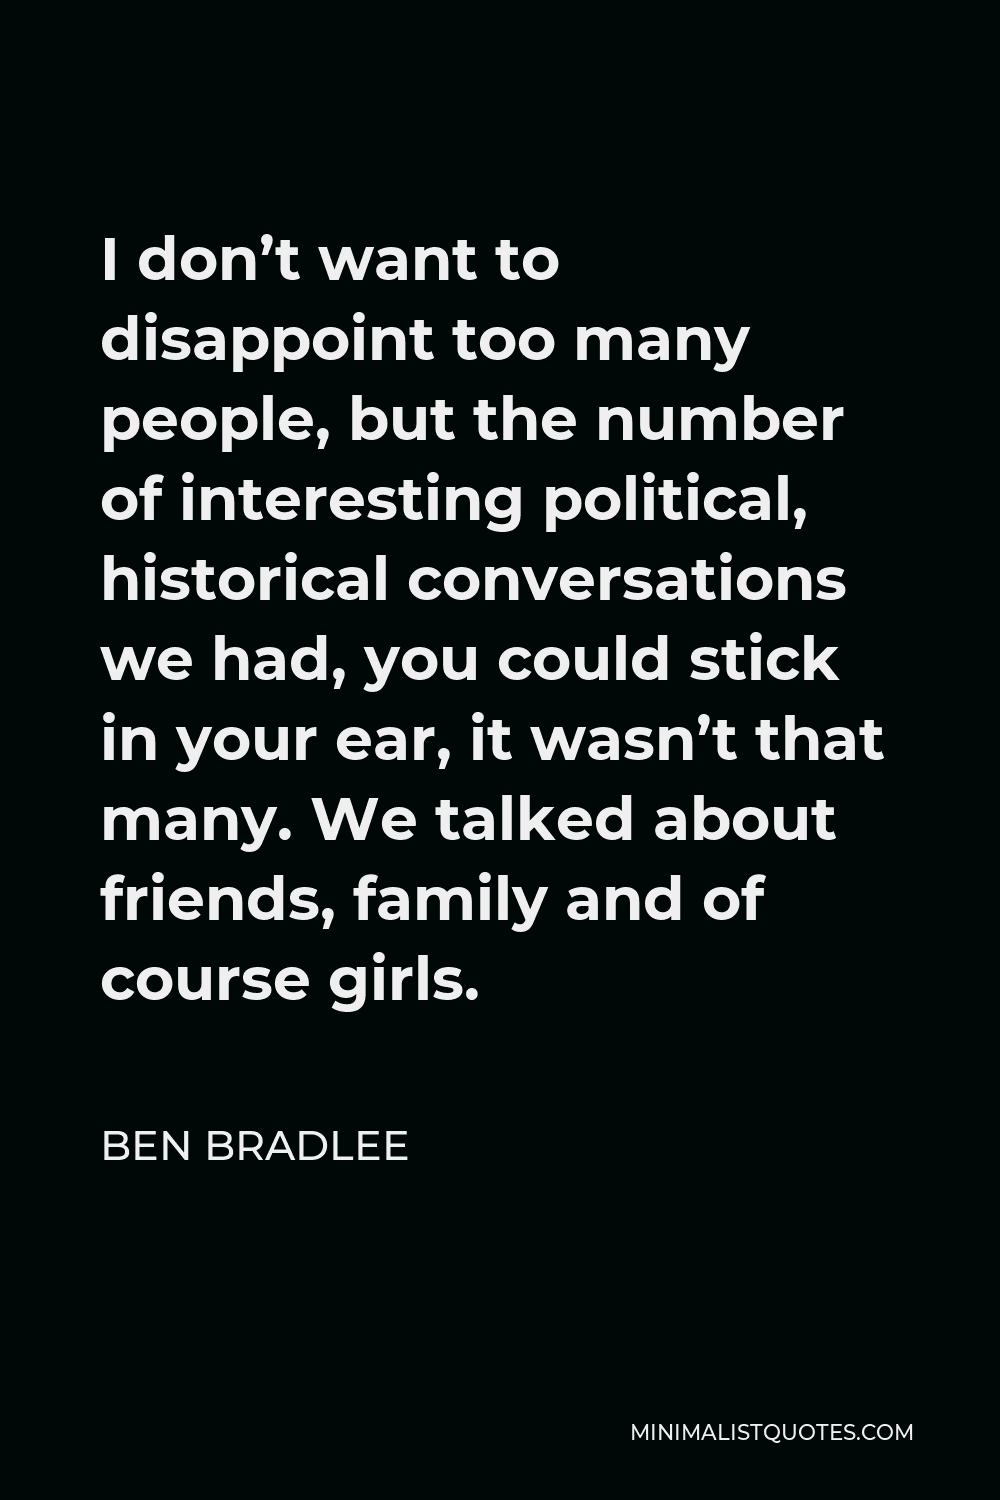 Ben Bradlee Quote - I don’t want to disappoint too many people, but the number of interesting political, historical conversations we had, you could stick in your ear, it wasn’t that many. We talked about friends, family and of course girls.